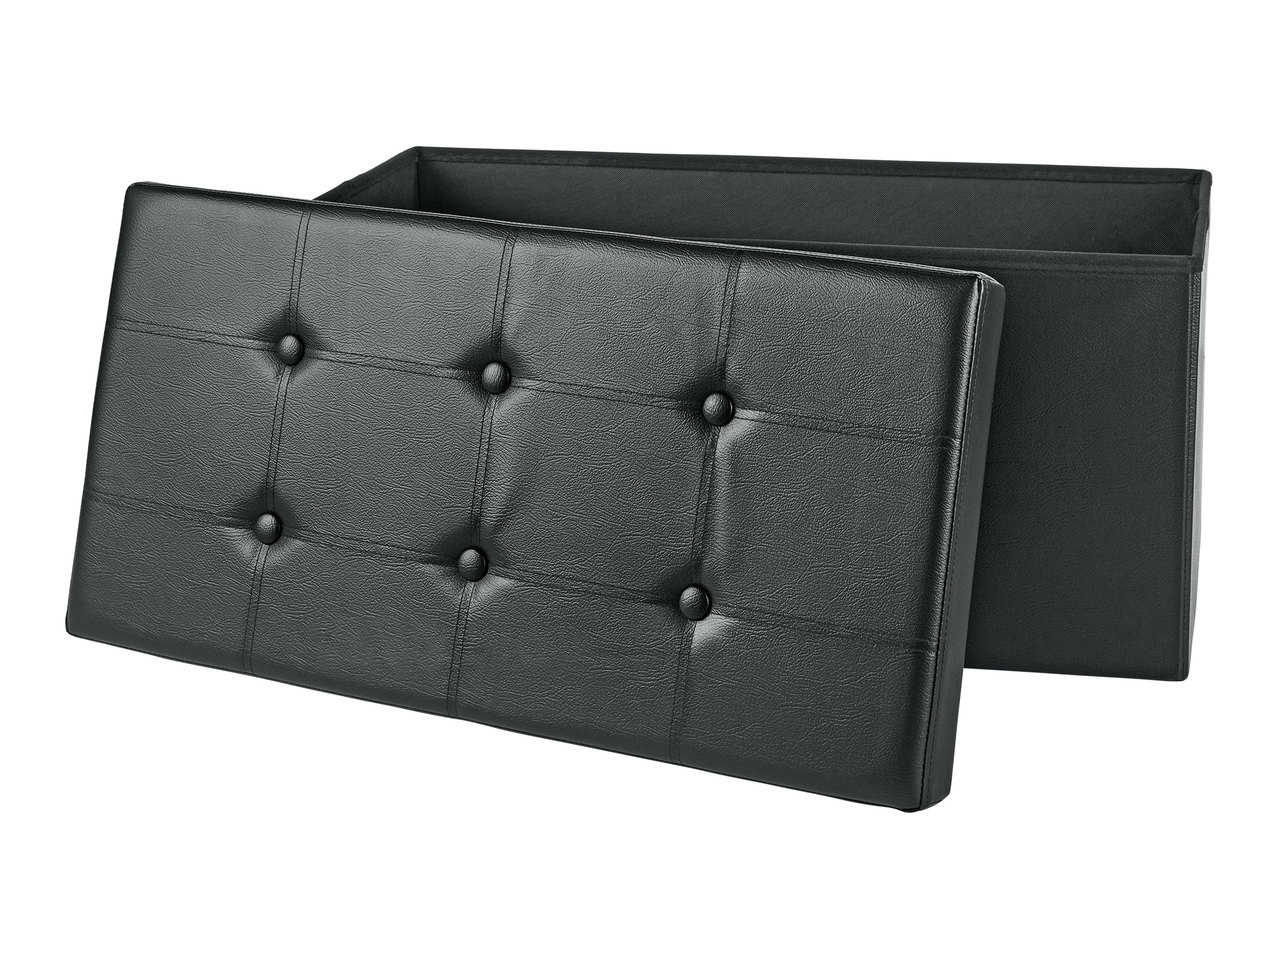 Livarno Living Faux Leather Storage Bench1